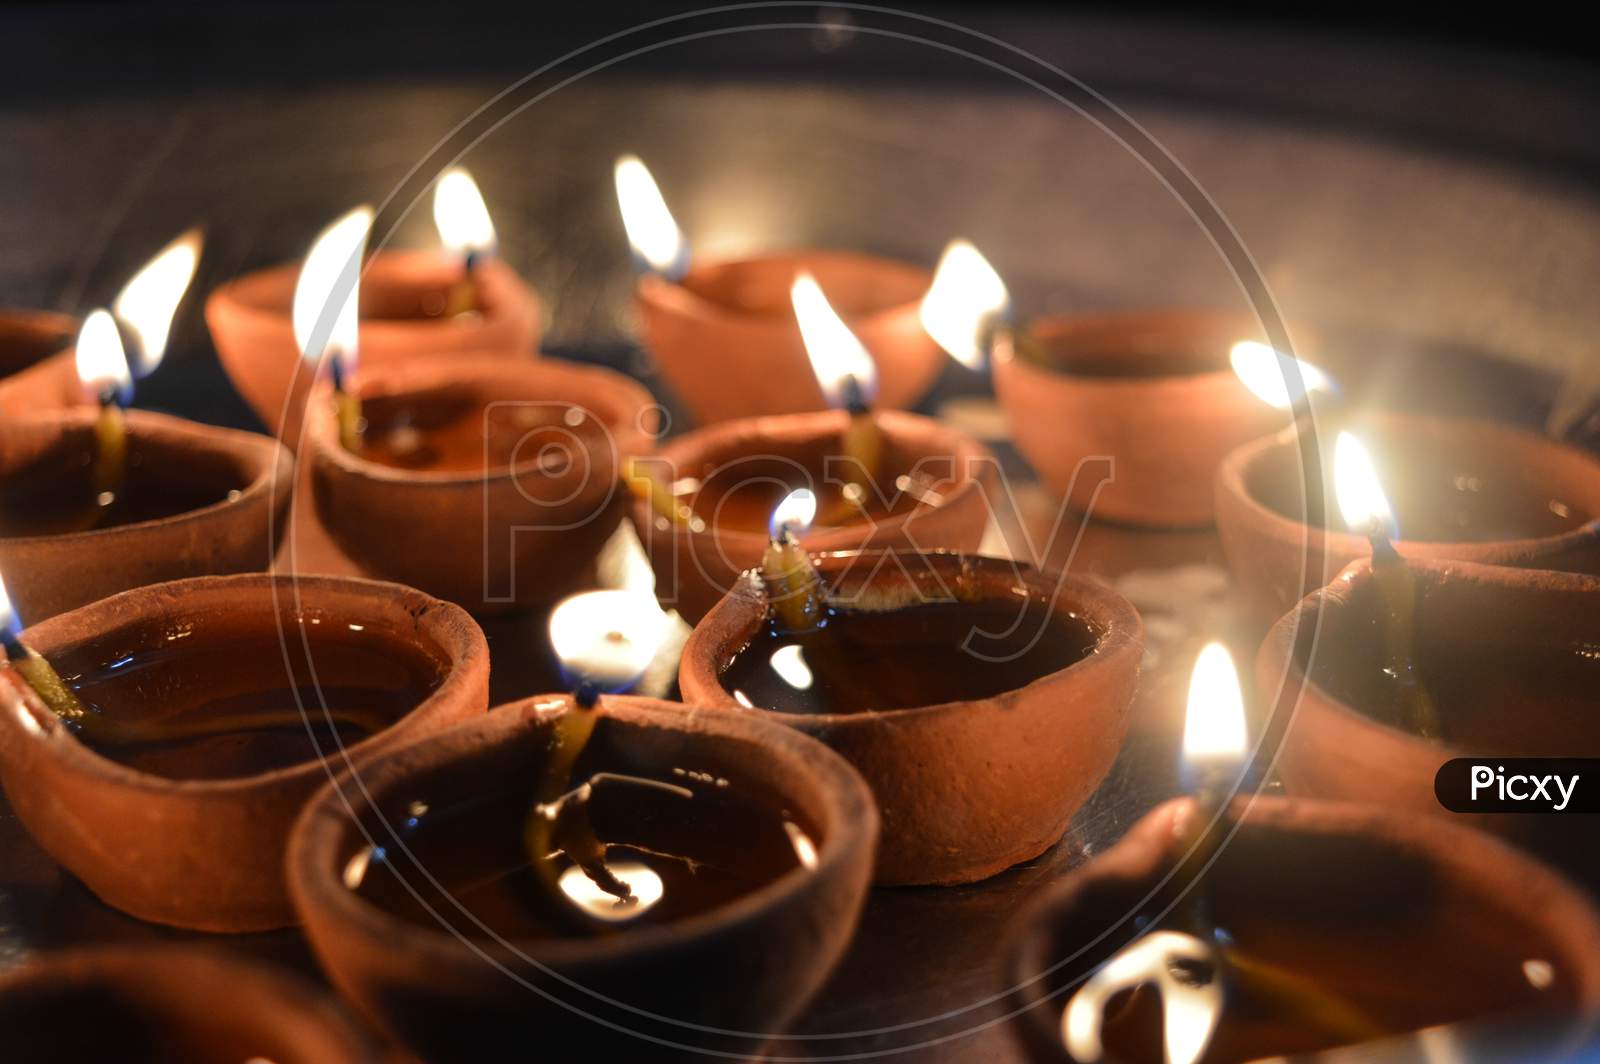 A Plate Is Which Is Loaded With Rose And Candle On Indian Festival Diwali Deepawali With Fire Isolated On Table